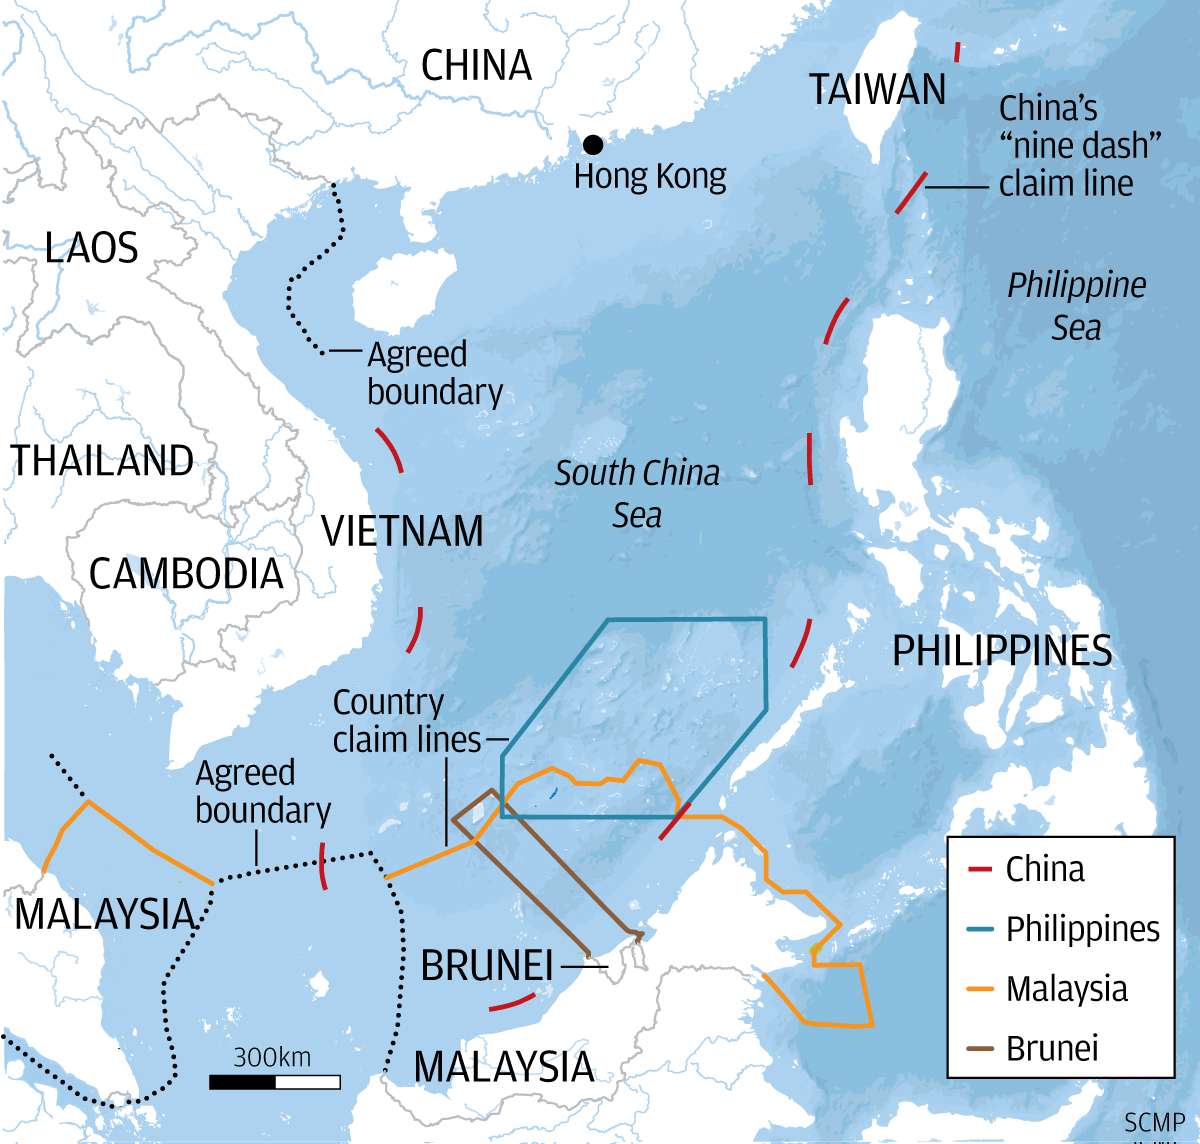 Conflict continues over South China Sea